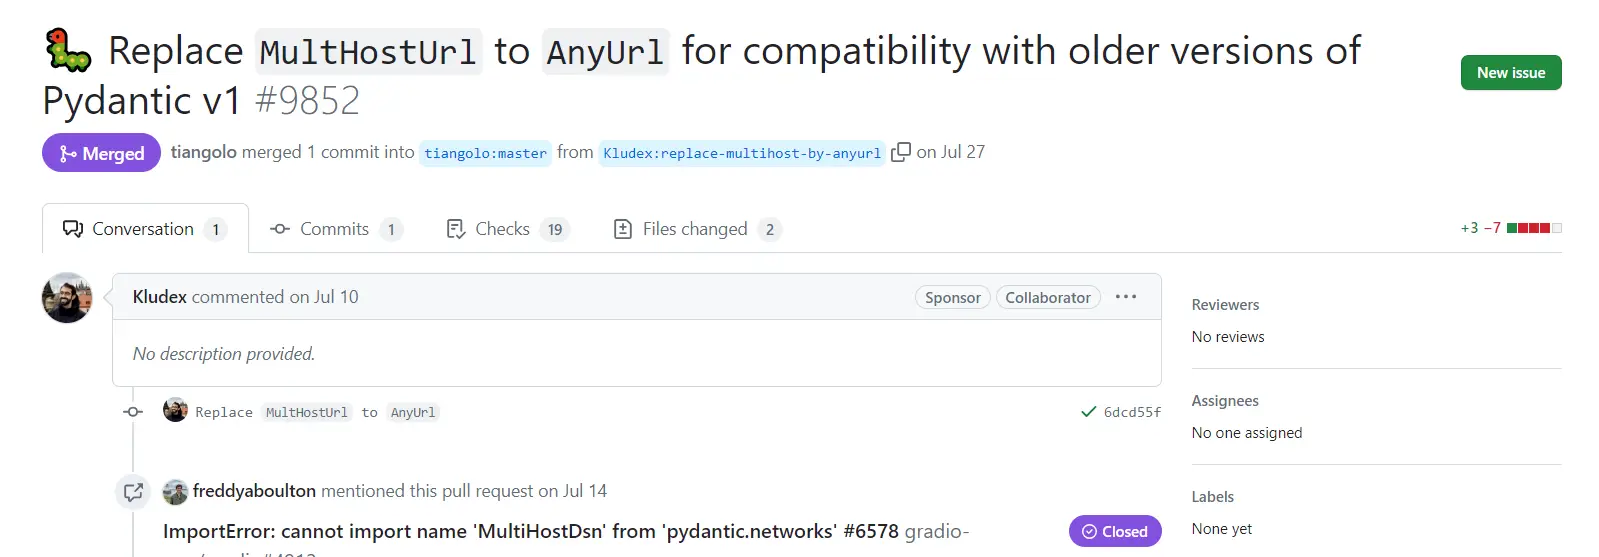 This is aPydantic networks import error message. Github PR closing it